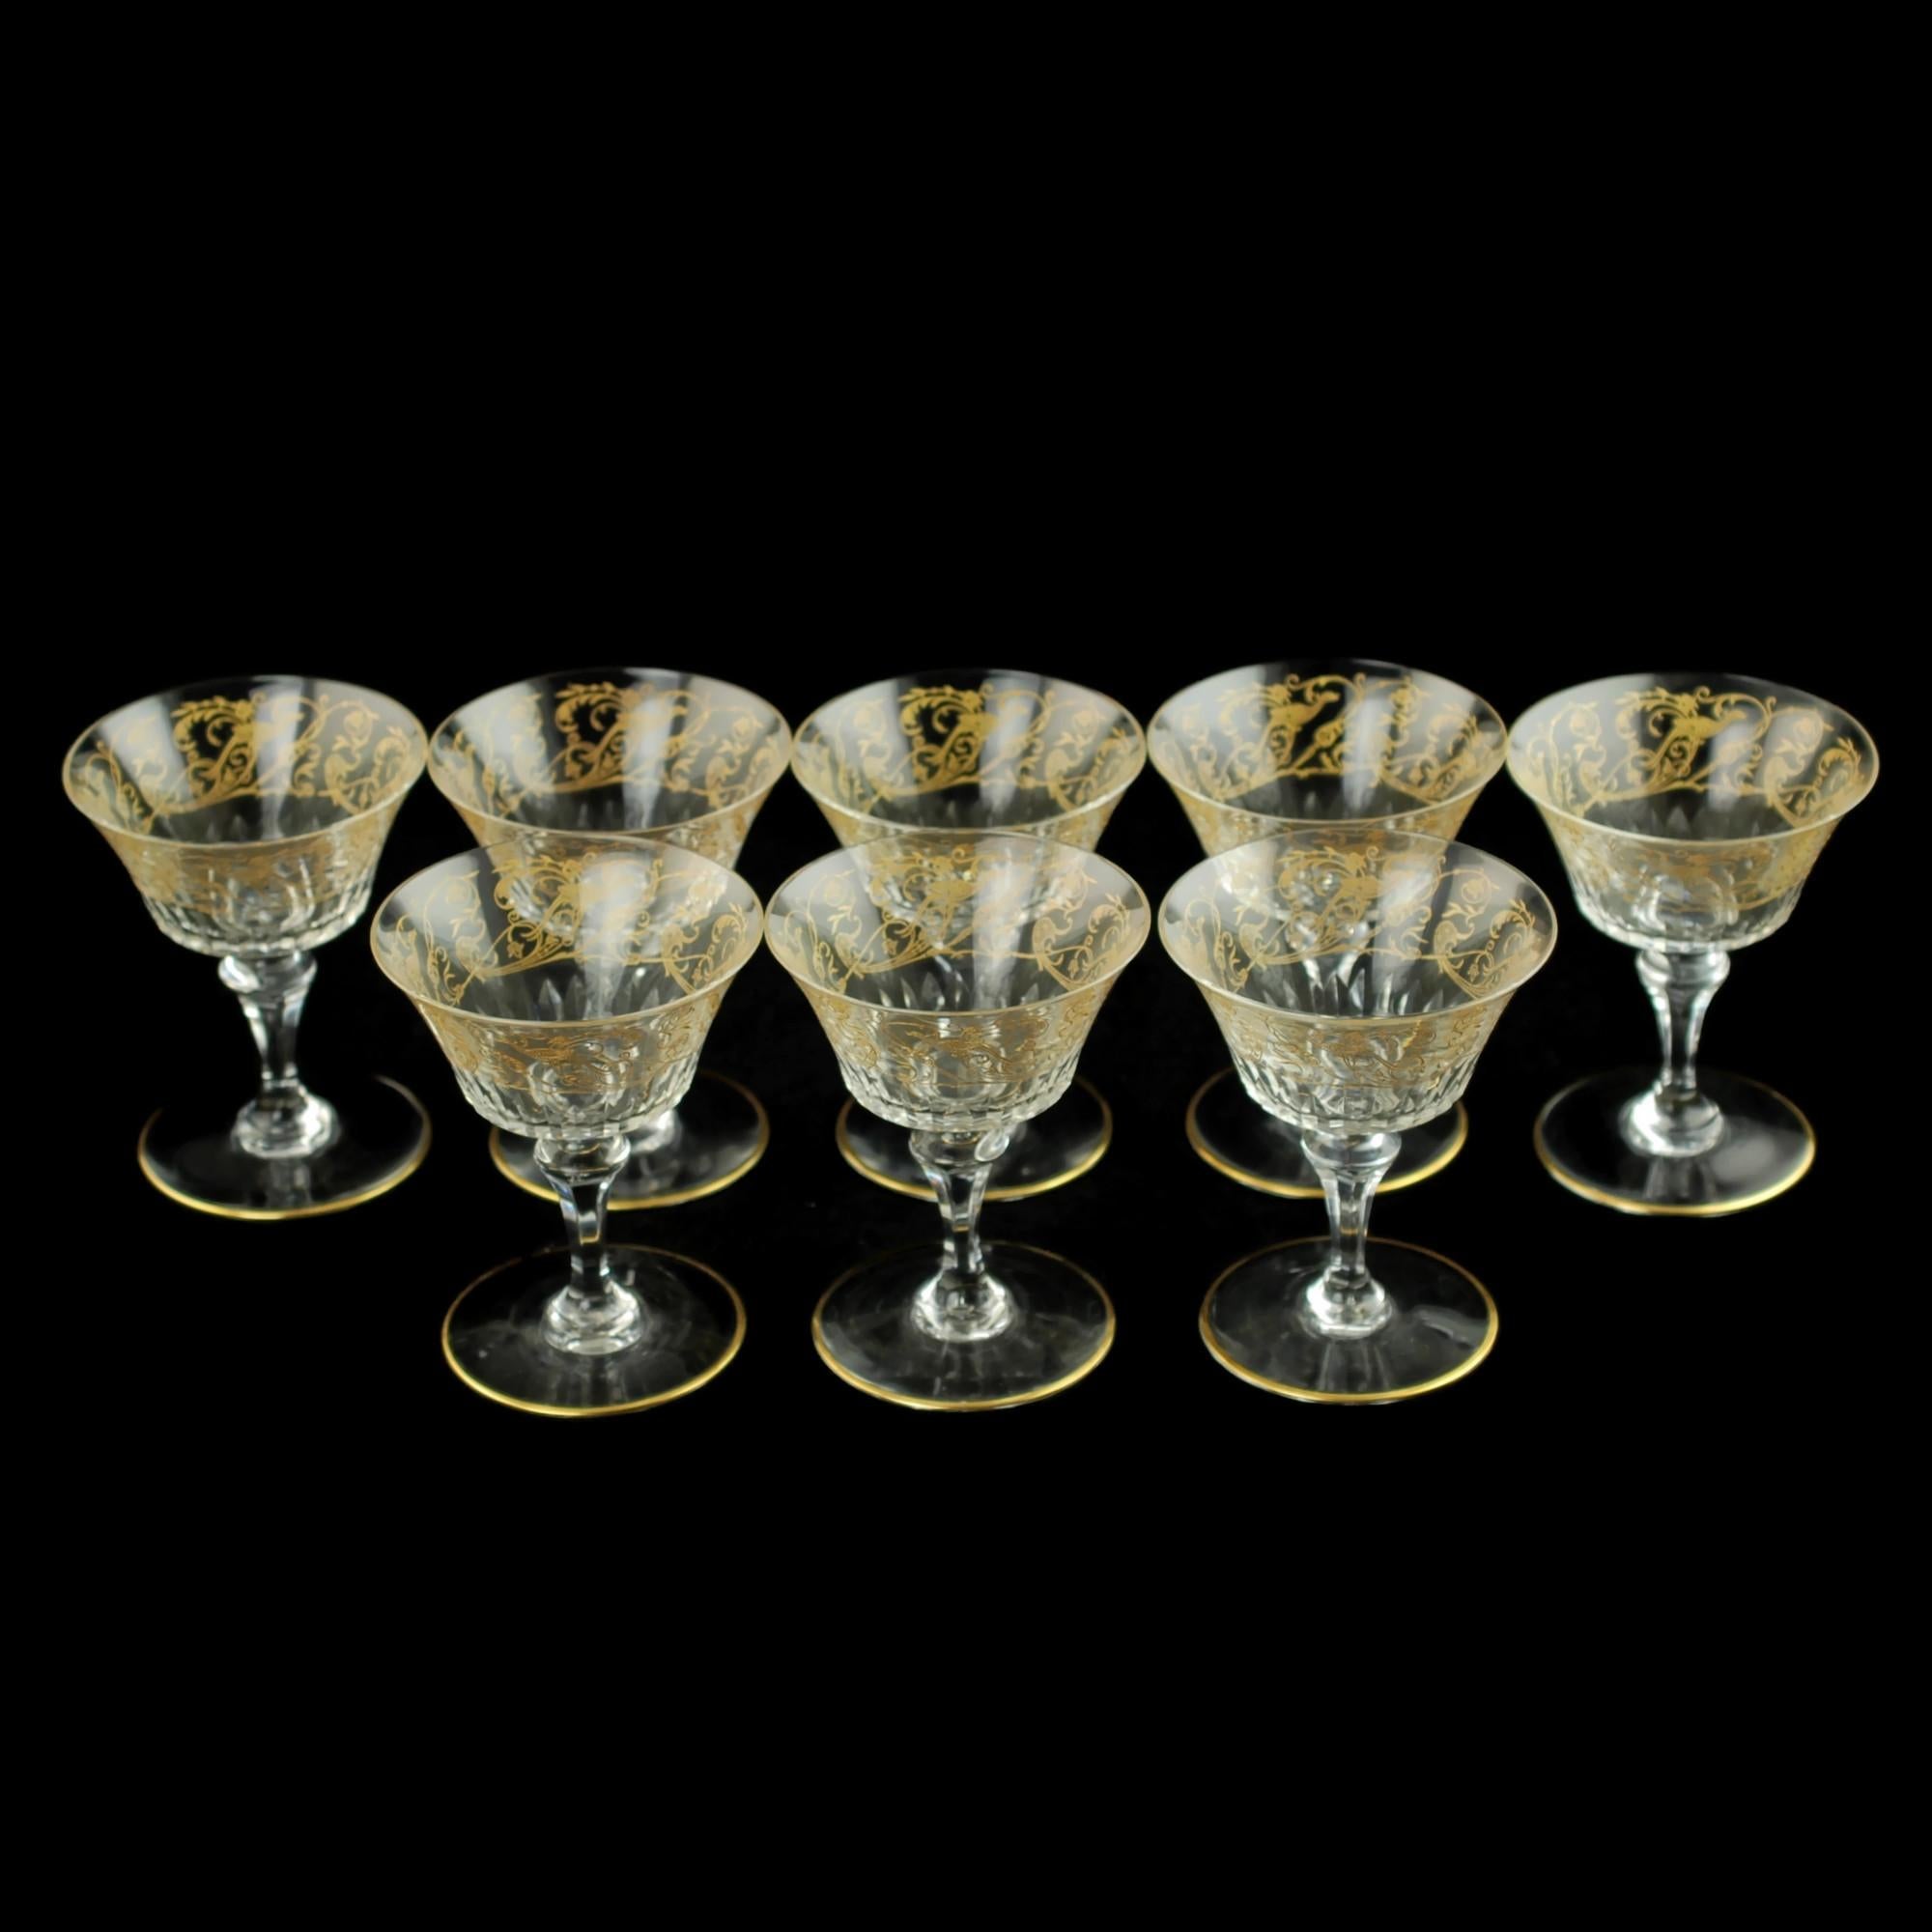 French Baccarat Bergame Parme Gilt Etched Crystal Glasses with Paneled Stems Set of 16 For Sale